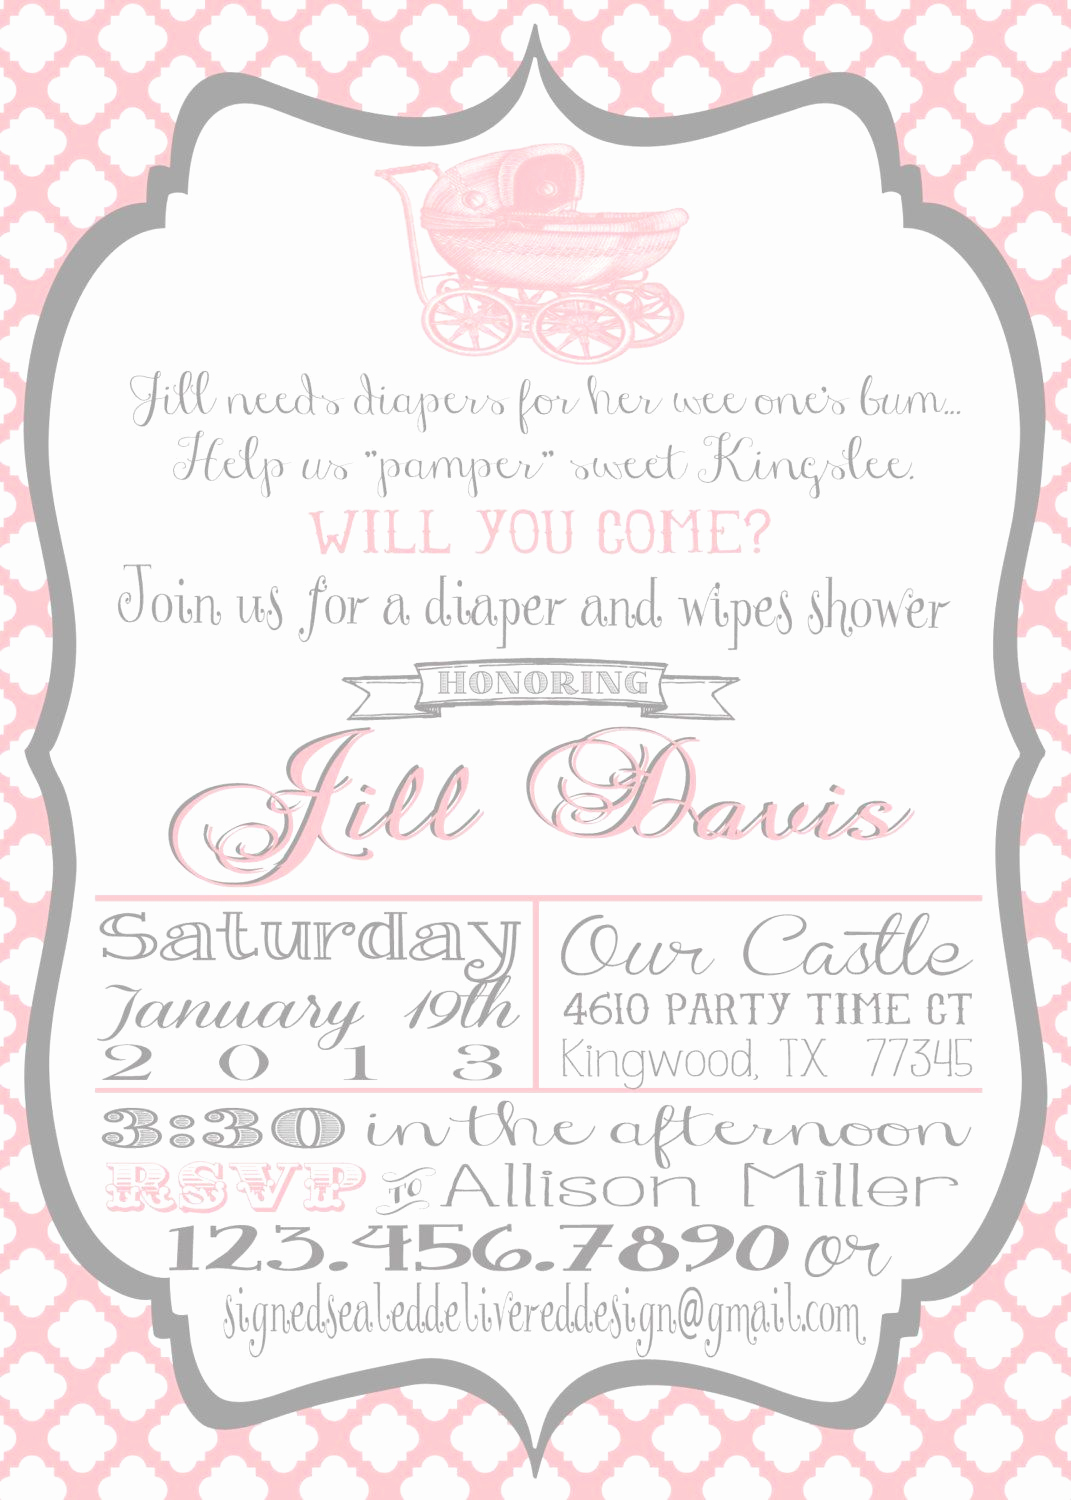 Diapers and Wipes Shower Invitation Luxury 5x7 Diapers and Wipes Baby Shower Invitation with Insert